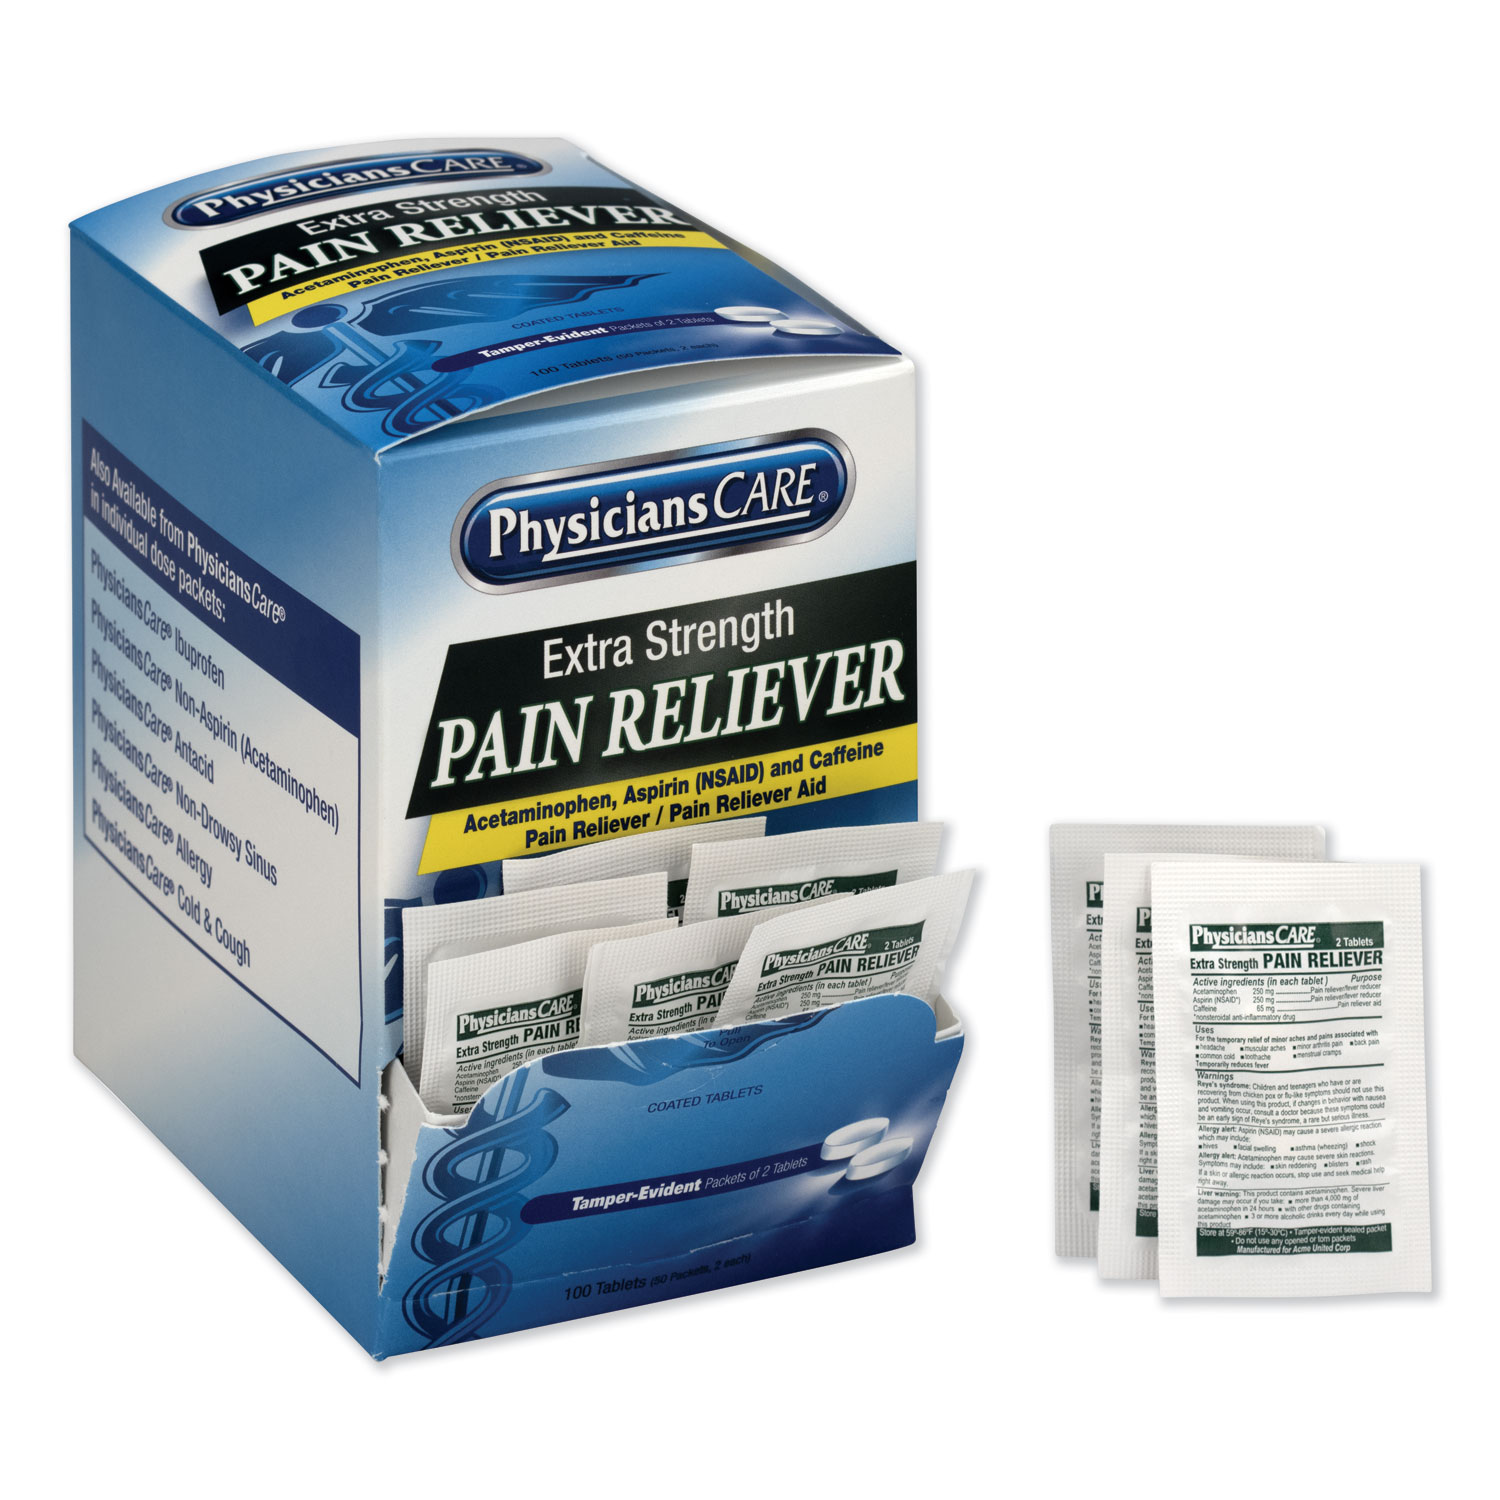  PhysiciansCare 90316 Extra-Strength Pain Reliever, Two-Pack, 50 Packs/Box (ACM90316) 